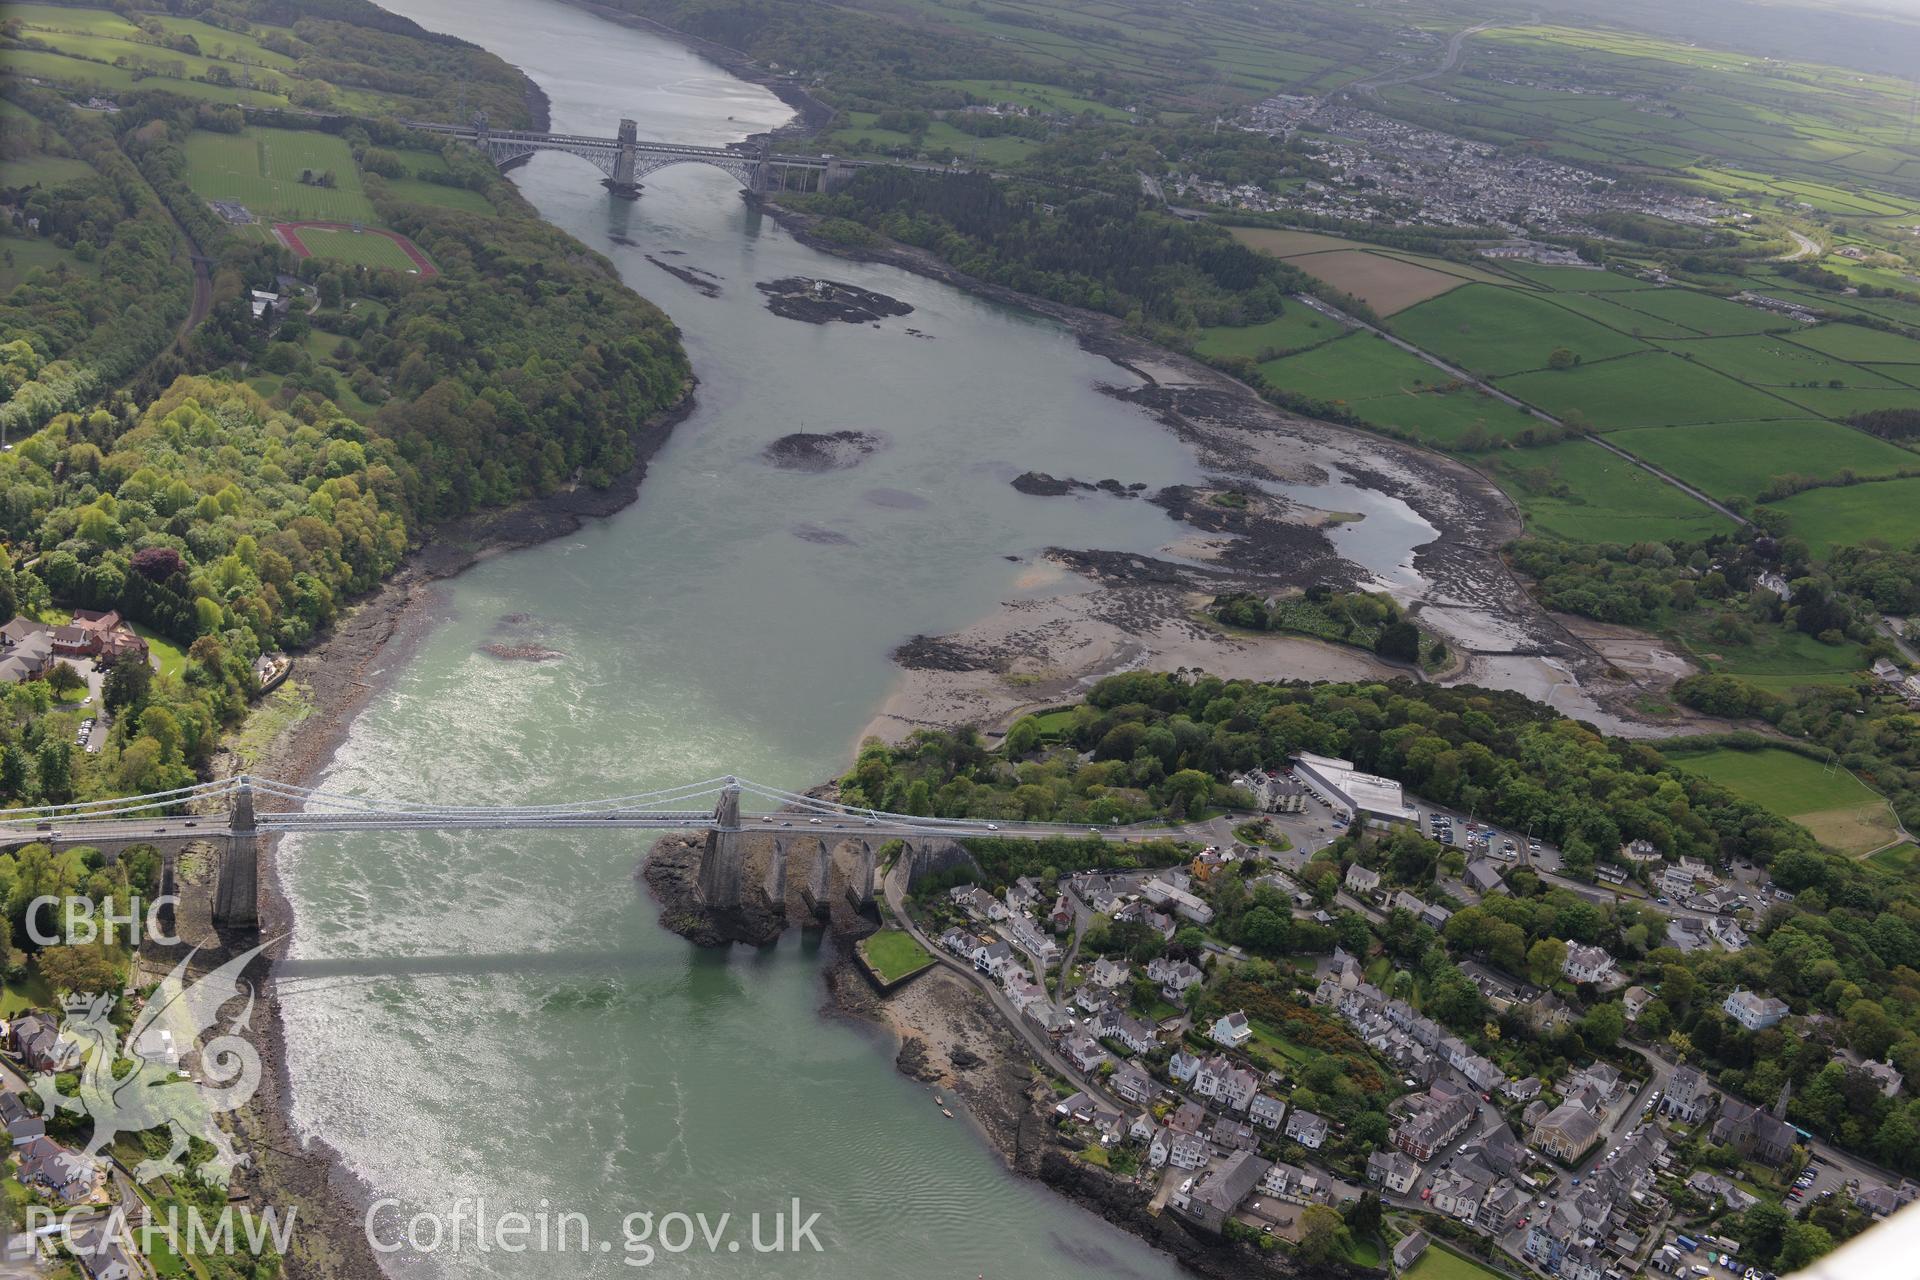 The town of Menai Bridge, with Menai Suspension Bridge and the Britannia Bridge. Oblique aerial photograph taken during the Royal Commission?s programme of archaeological aerial reconnaissance by Toby Driver on 22nd May 2013.